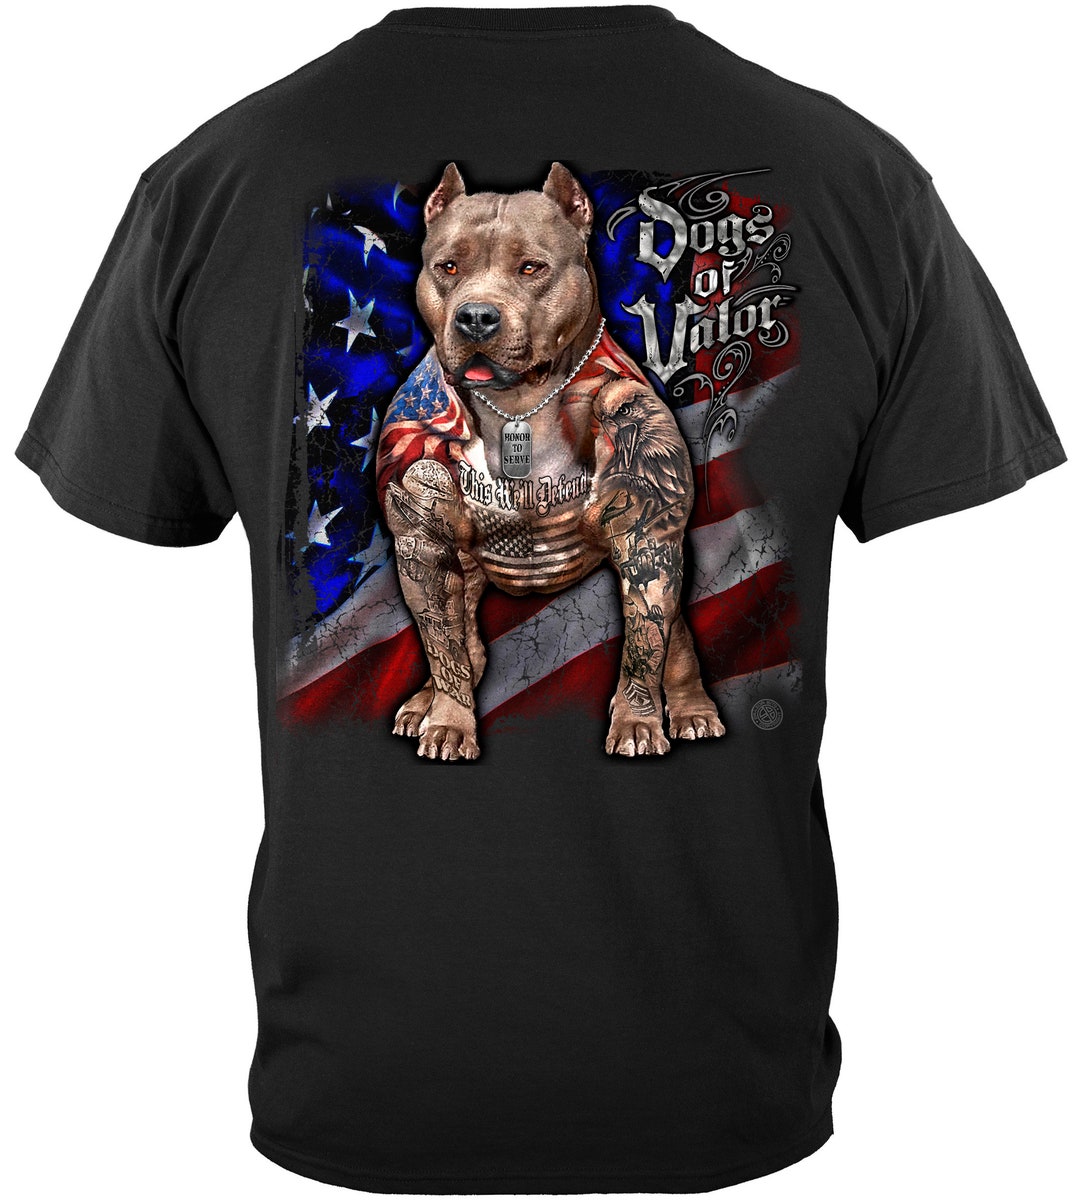 Dogs of Valor This We'll Defend Pit Bull T-shirt Sweatshirt Hoodie ...